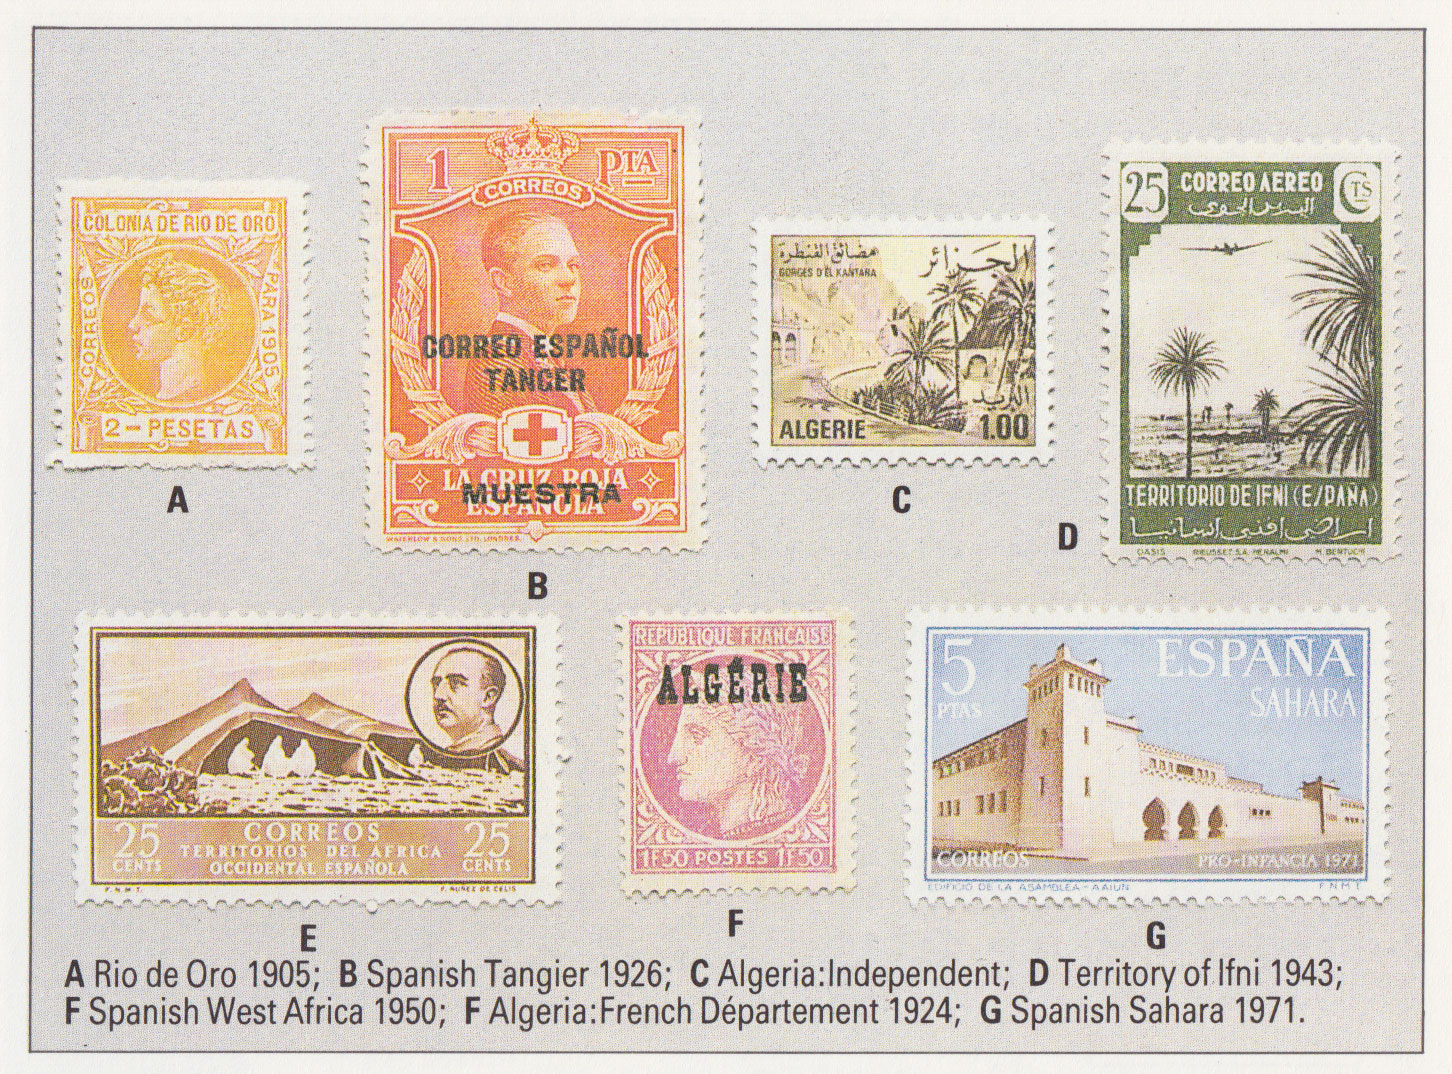 Spanish and Algerian stamps